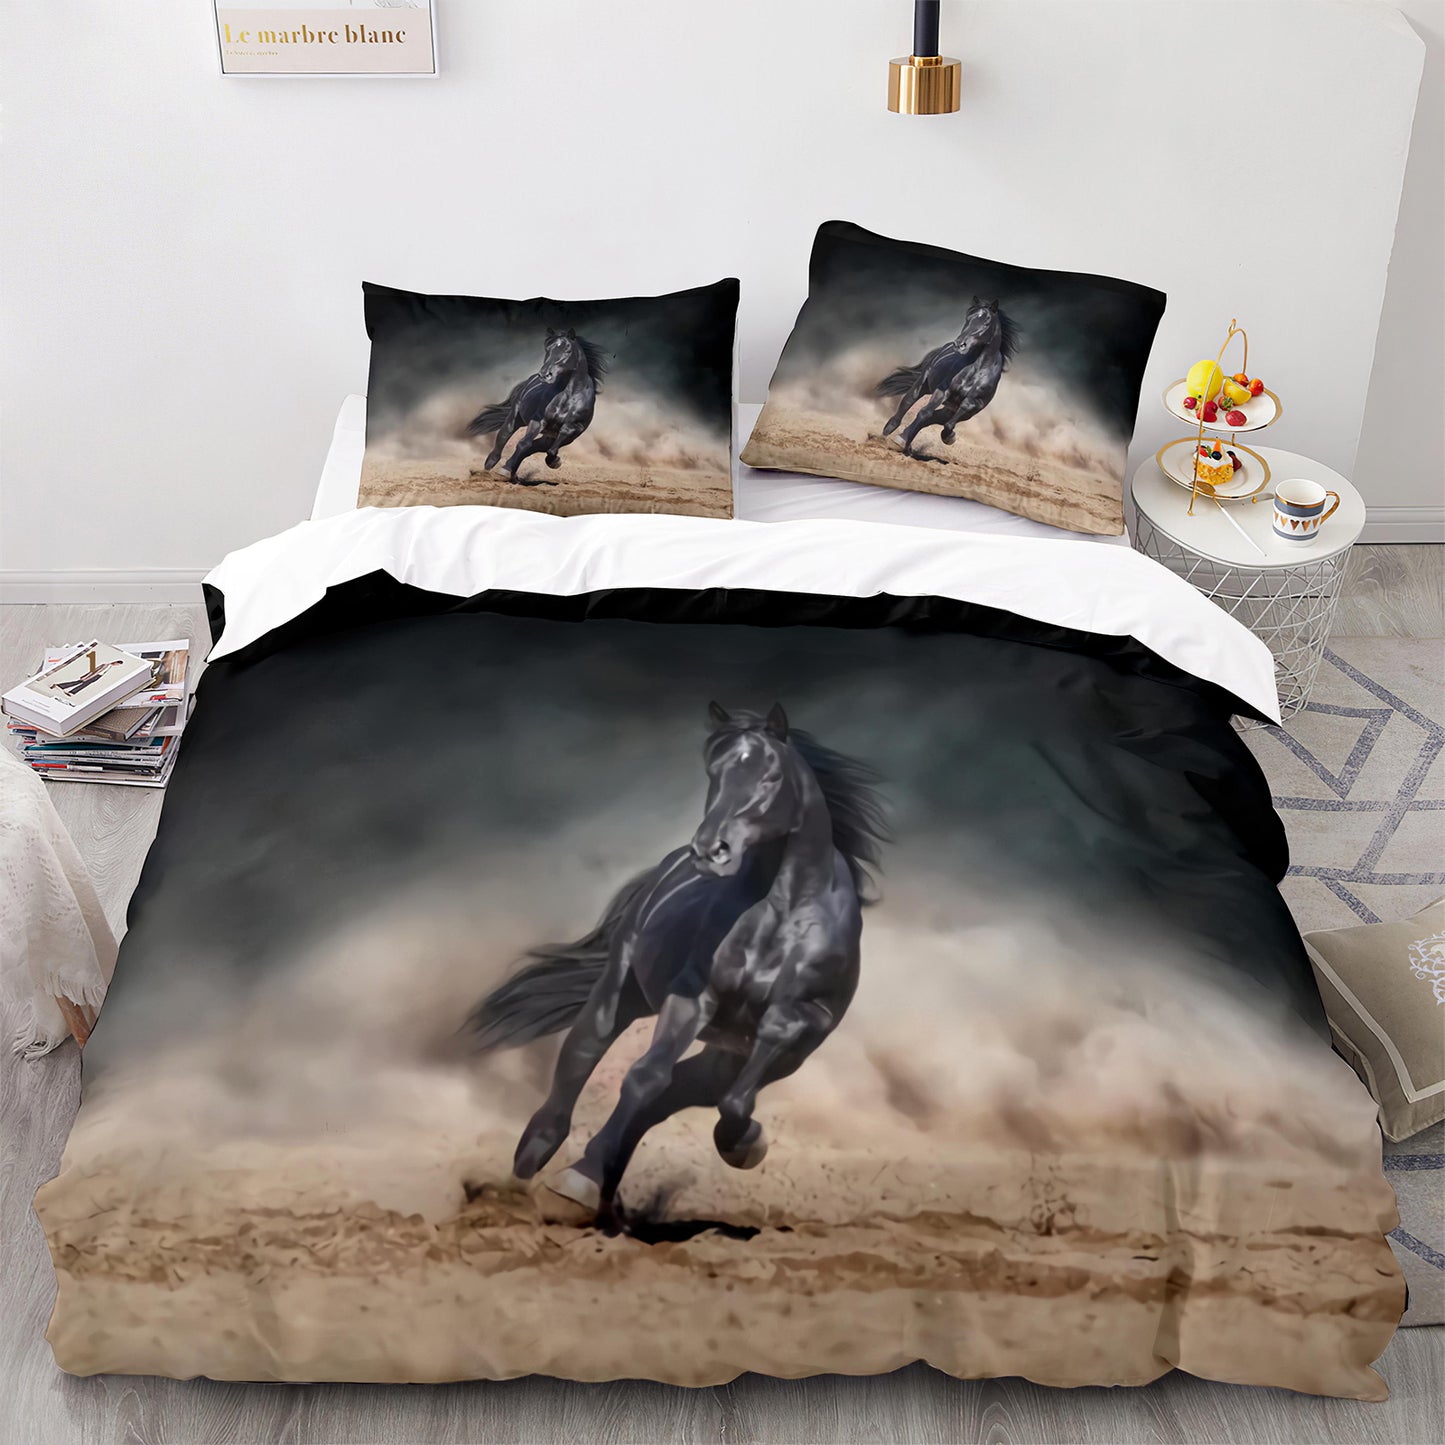 Cutom Duvet Cover Set Pattern Chic Comforter Cover King Size for Teens Adults Bedding Set with Pillowcases  M1064